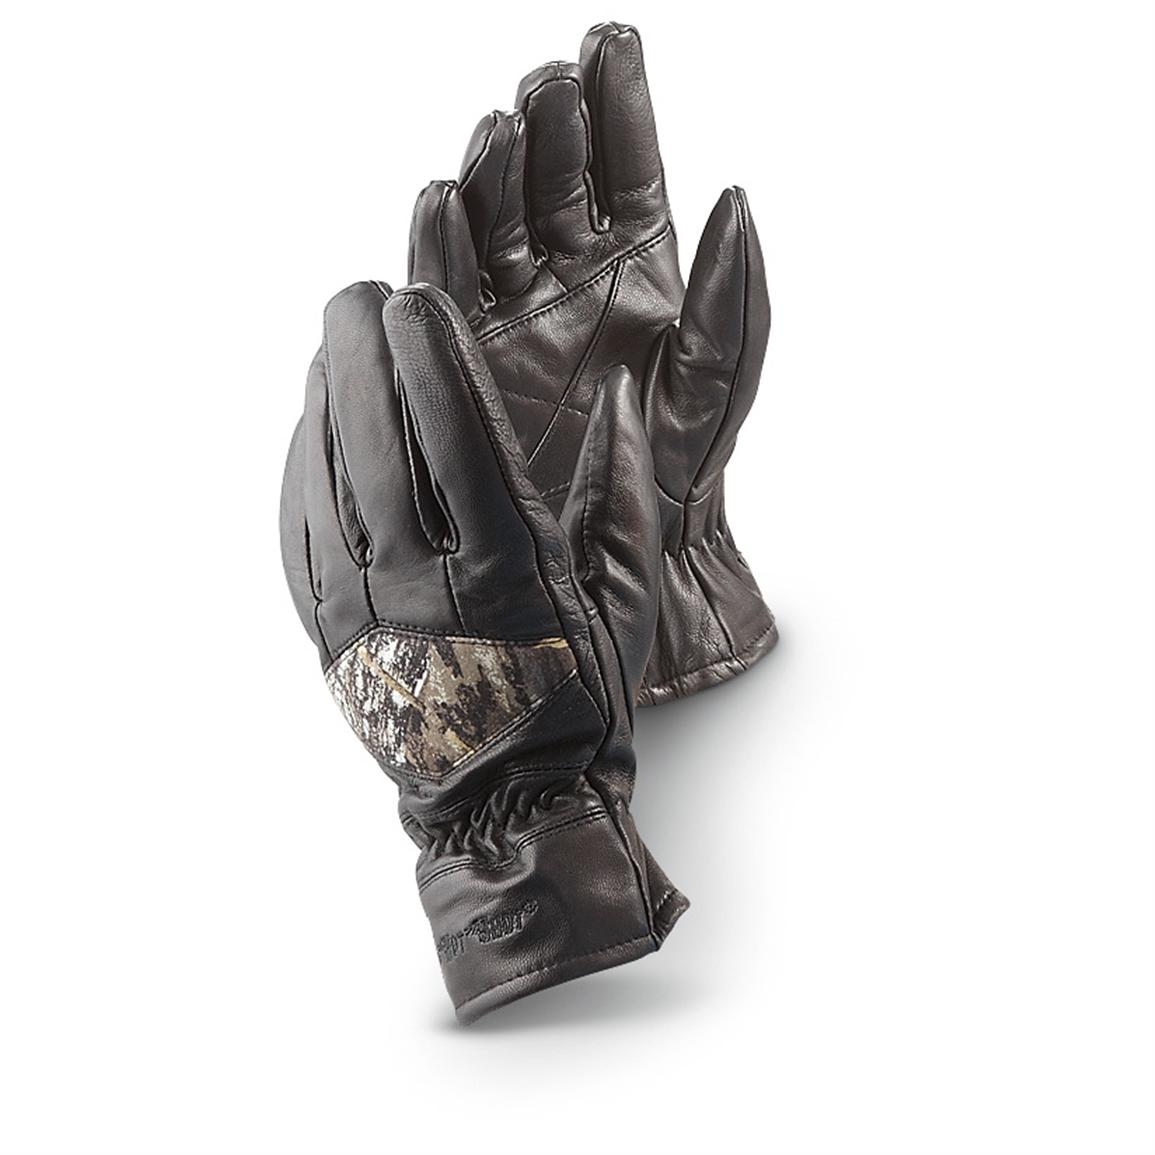 2 - Prs. of 40 gram ™ Insulation Stag Leather Gloves, Black .